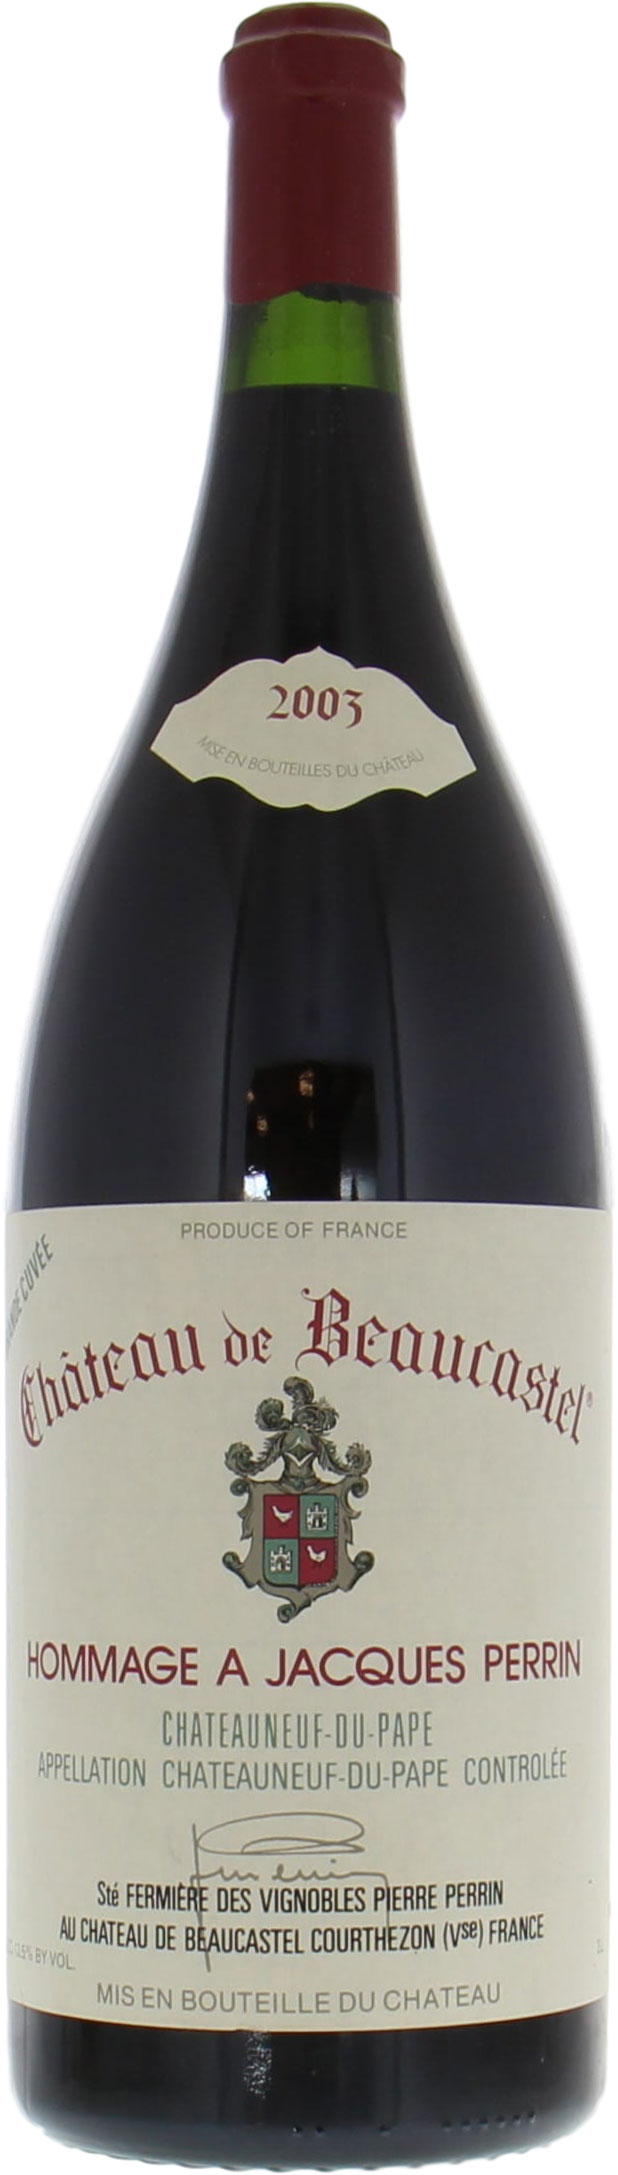 Chateau de Beaucastel - Chateauneuf du Pape Hommage Jacques Perrin 2003 Wax capsule slightly damaged